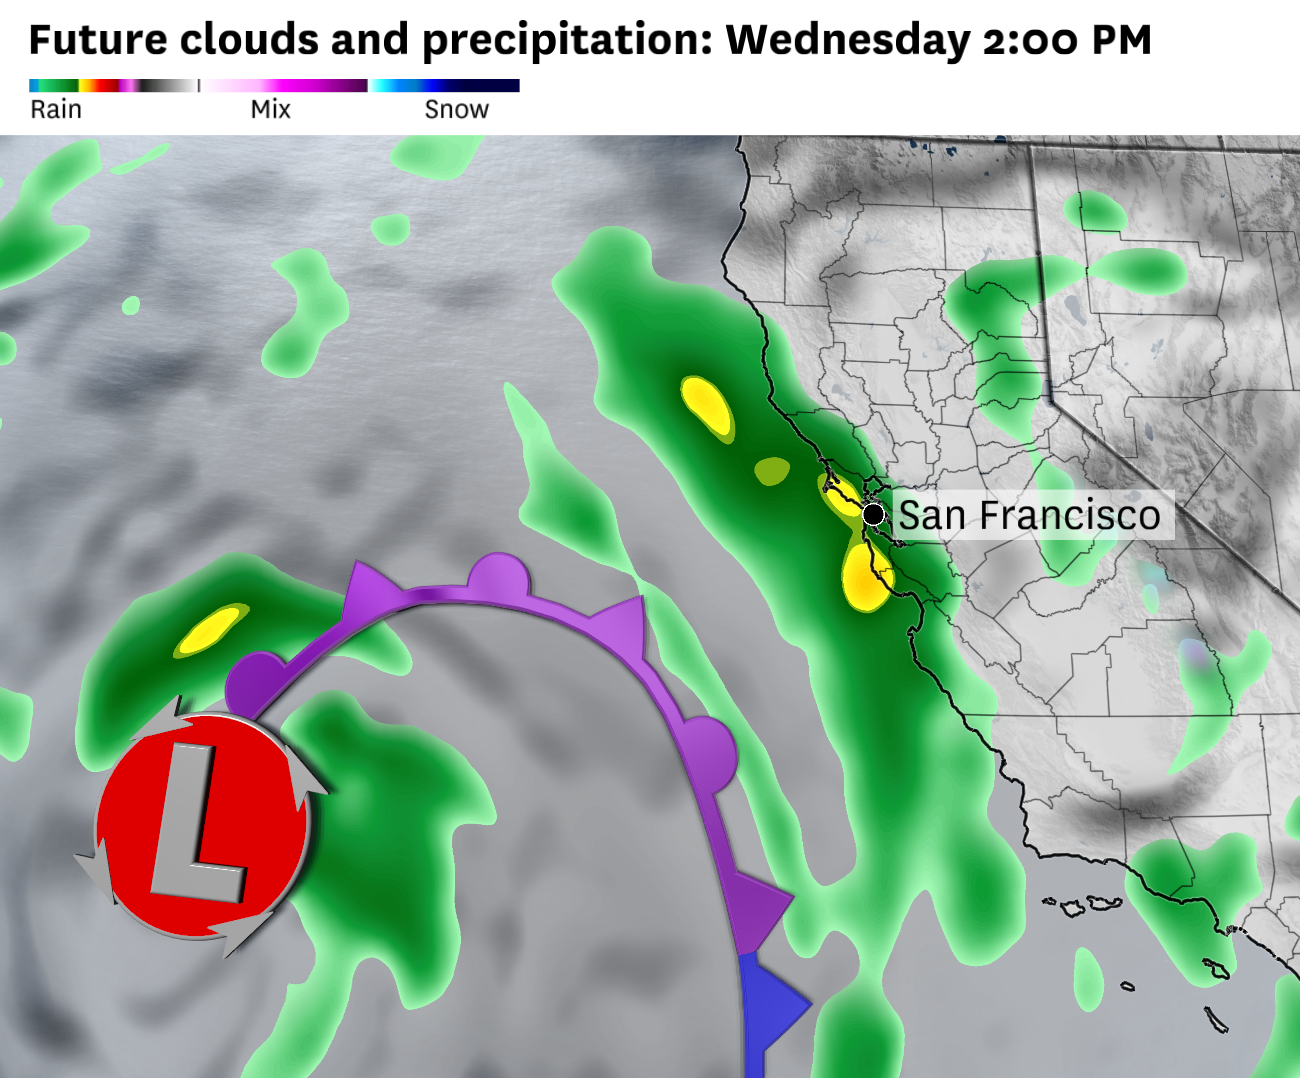 A storm brings rain to California today — here’s what to expect